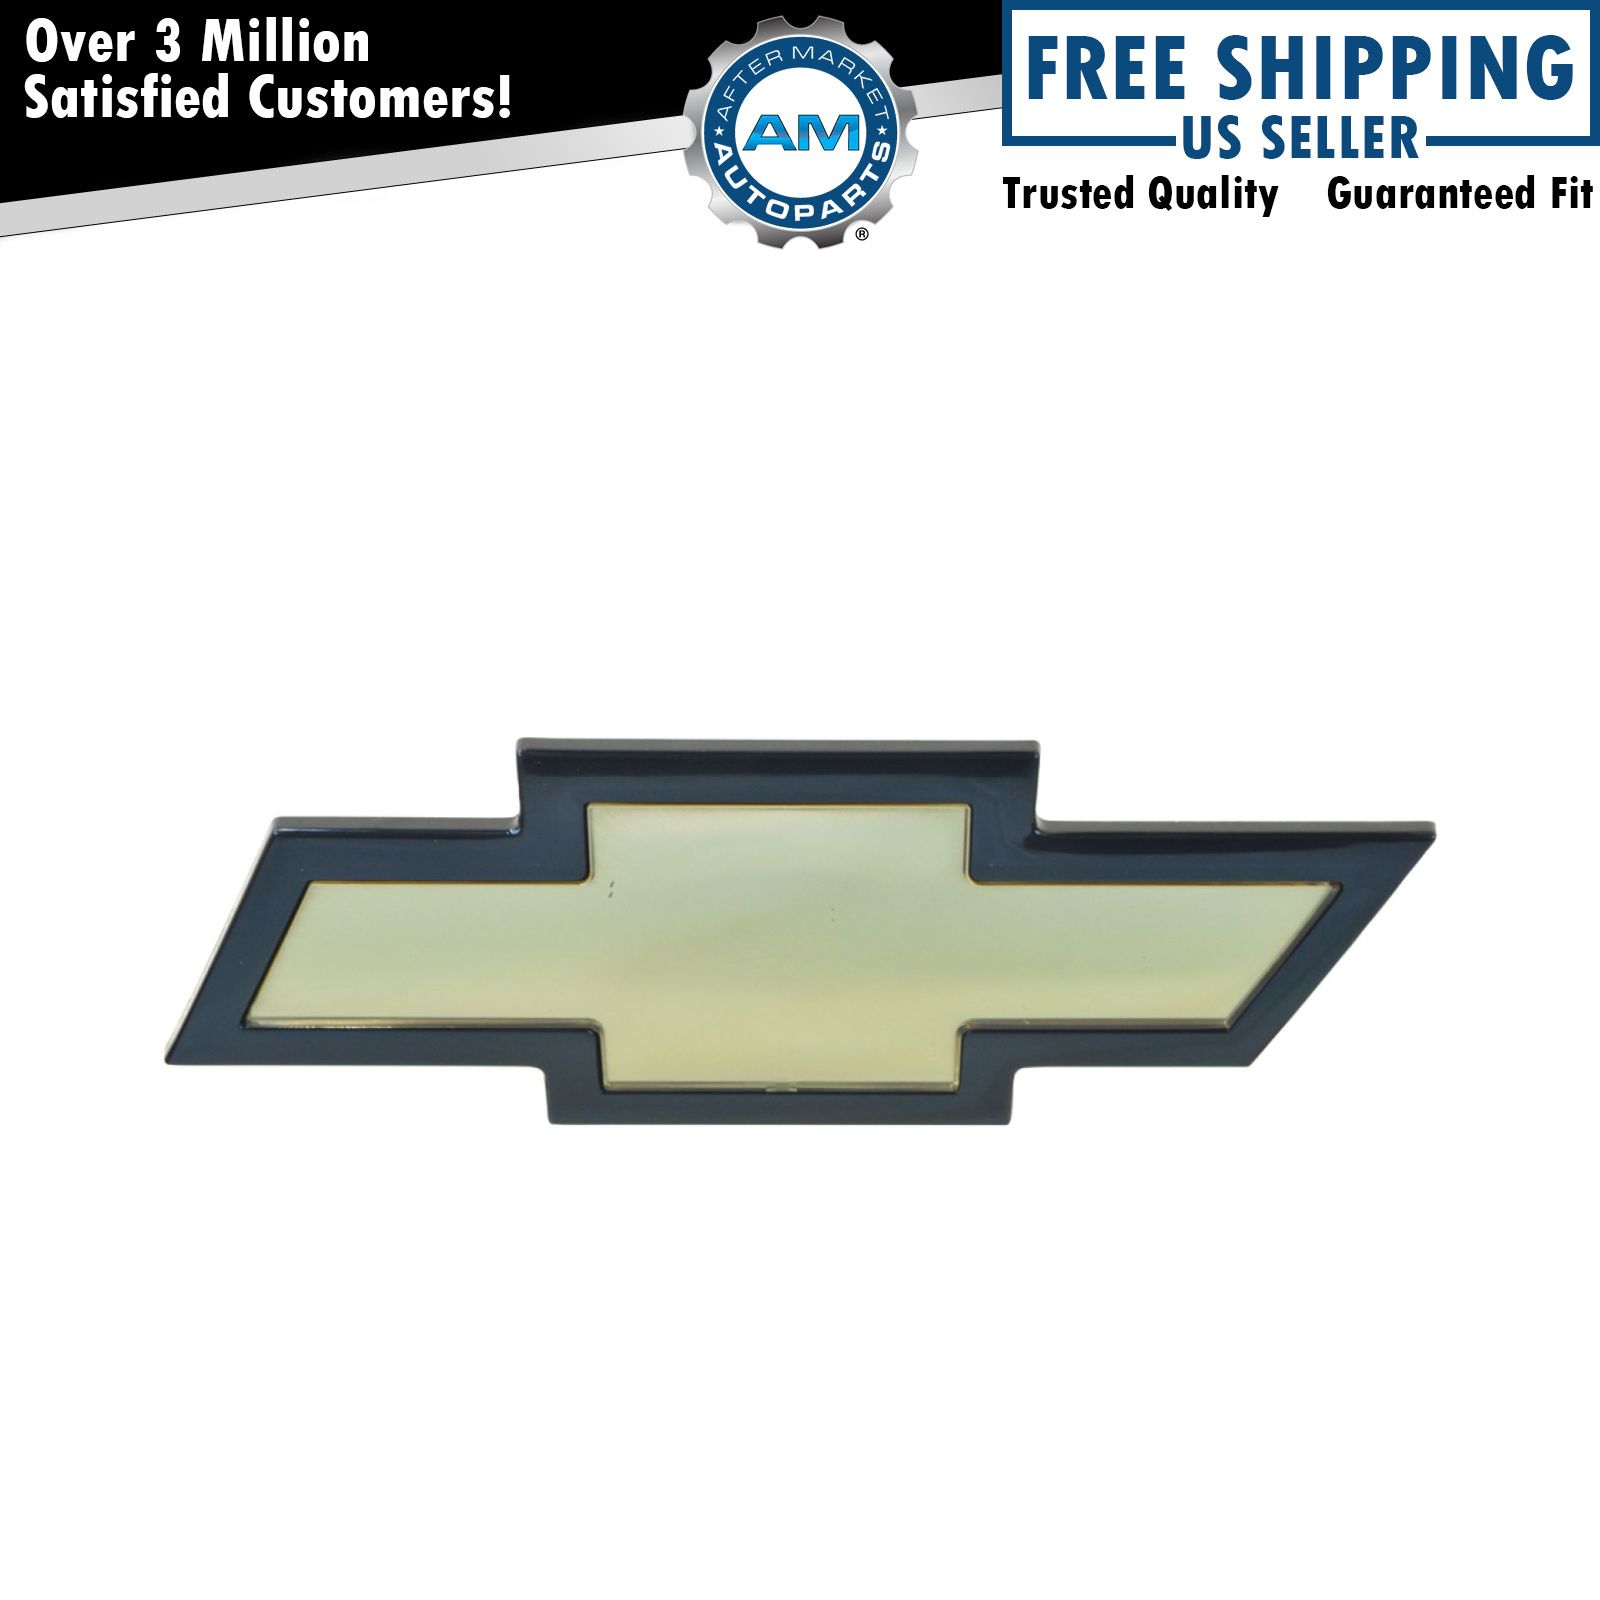 OEM Bowtie Emblem Grille Mounted Gold with Black Border for 03-17 Chevy Express